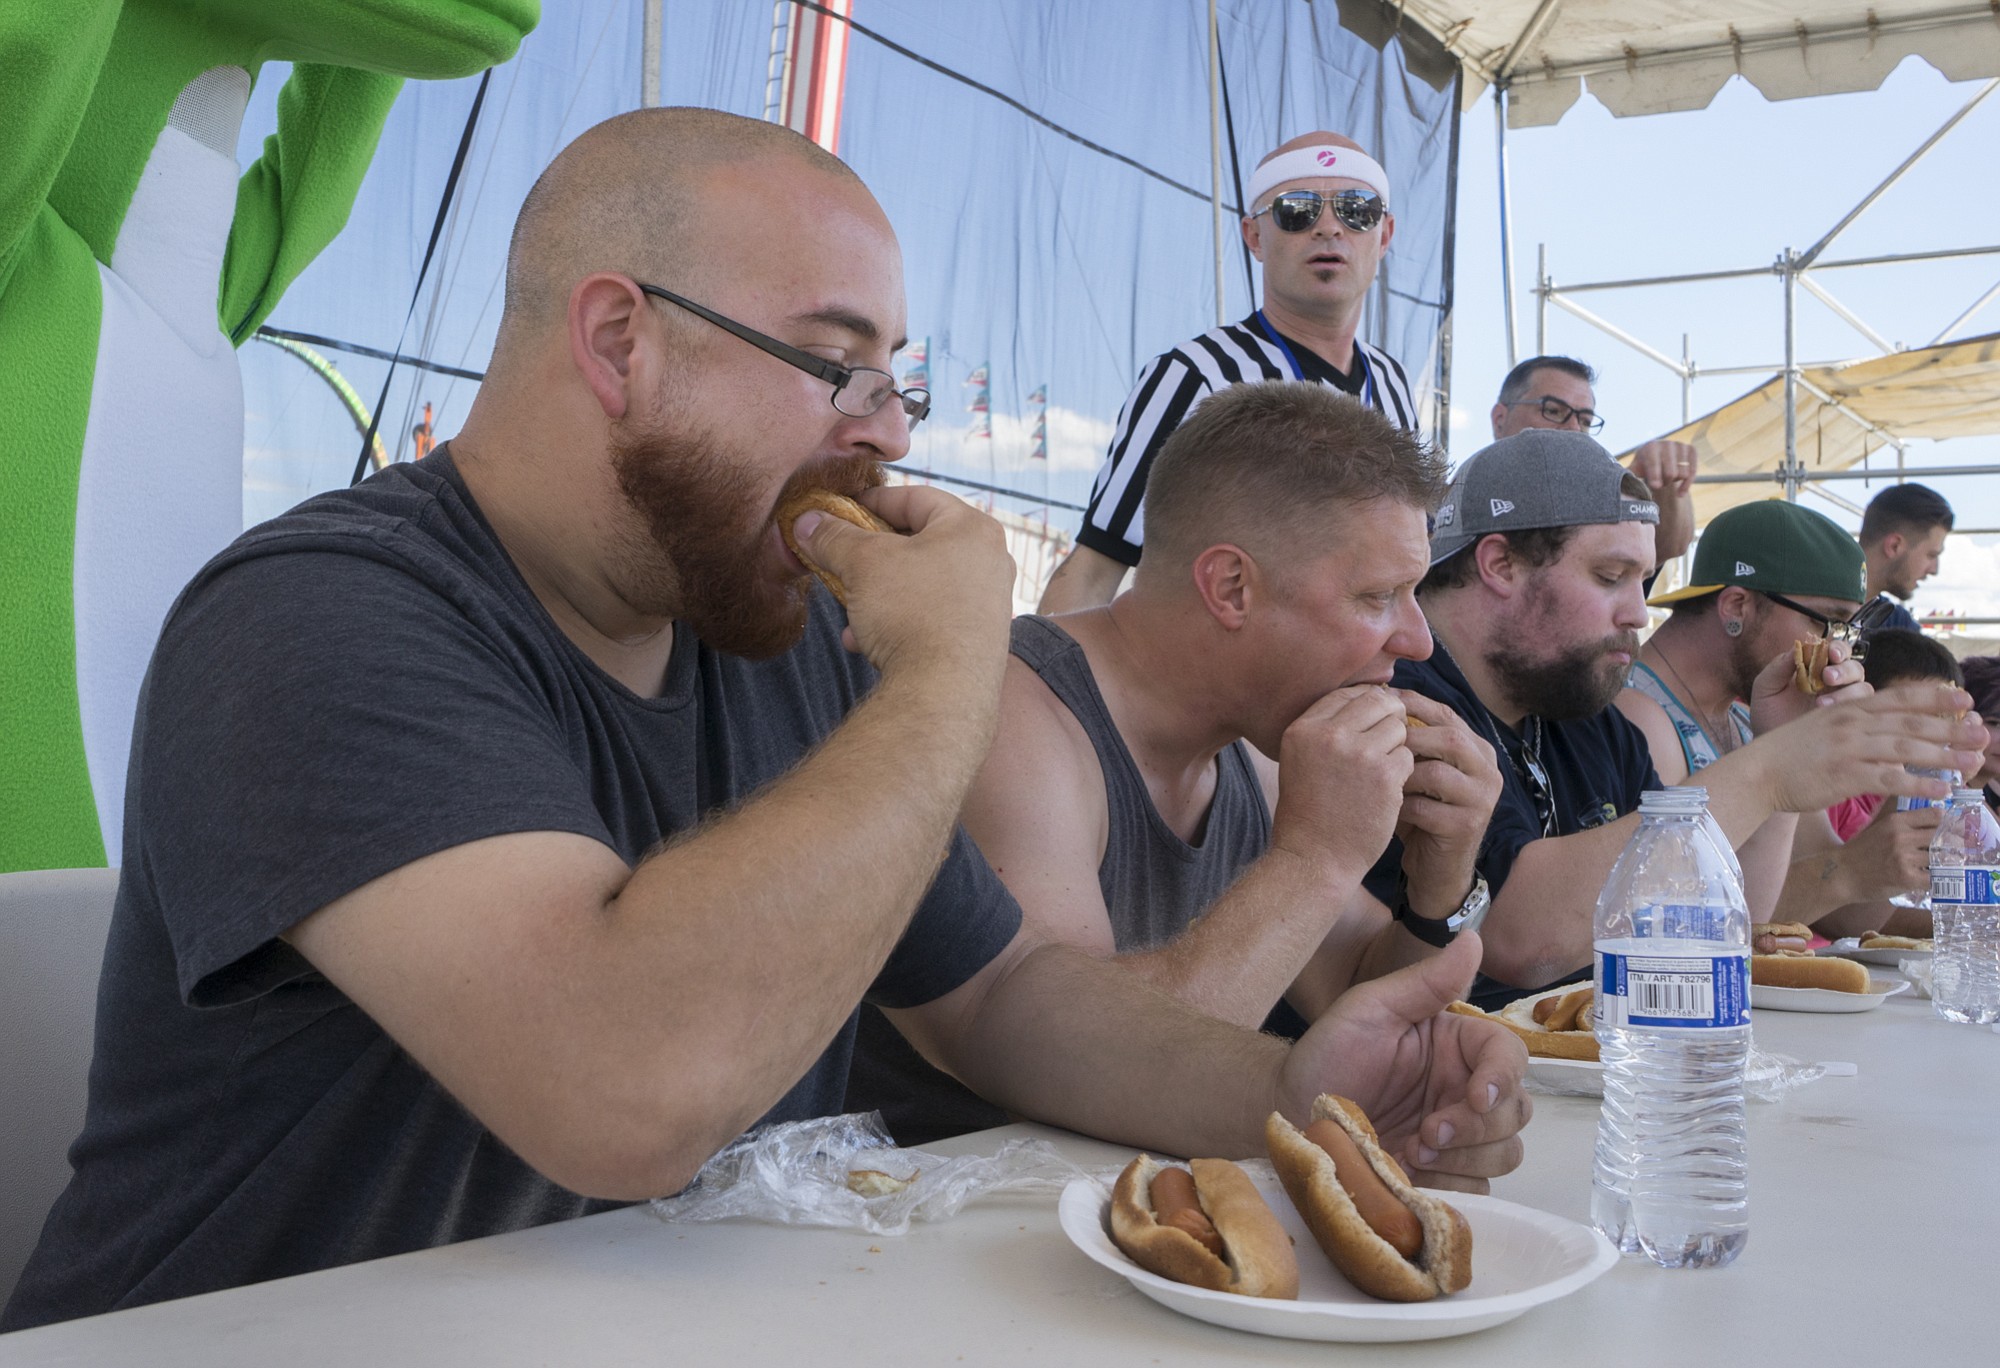 Chris Munoz of Vancouver, left, finishes his eighth hot dog Sunday afternoon during a hot dog eating contest at the Clark County Fair. Munoz won the competition.